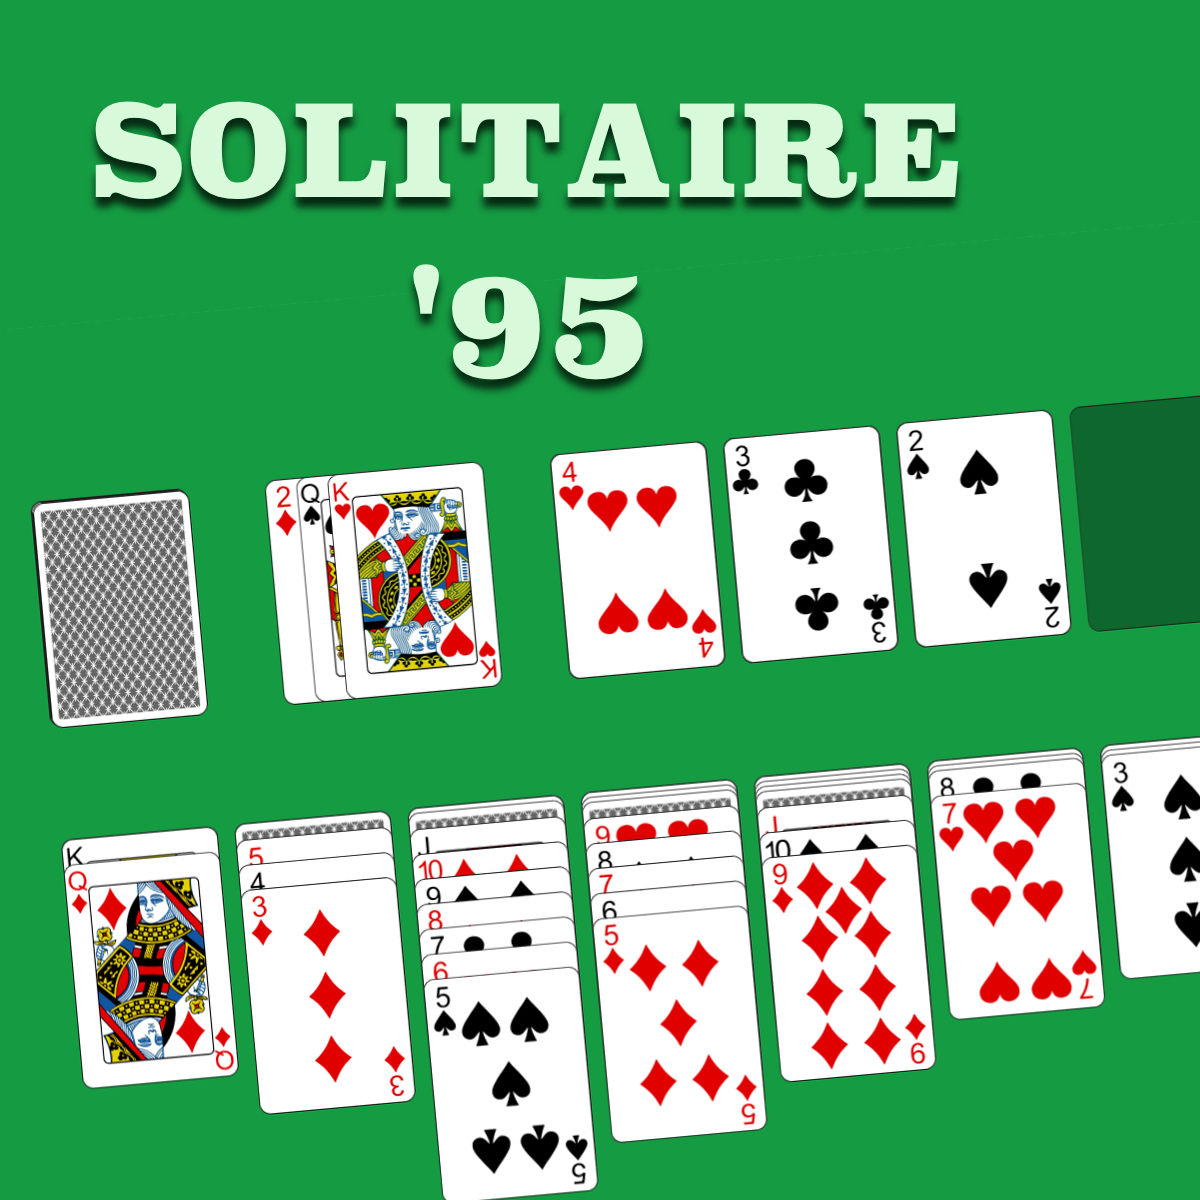 Solitaire Chess - Solitar logic